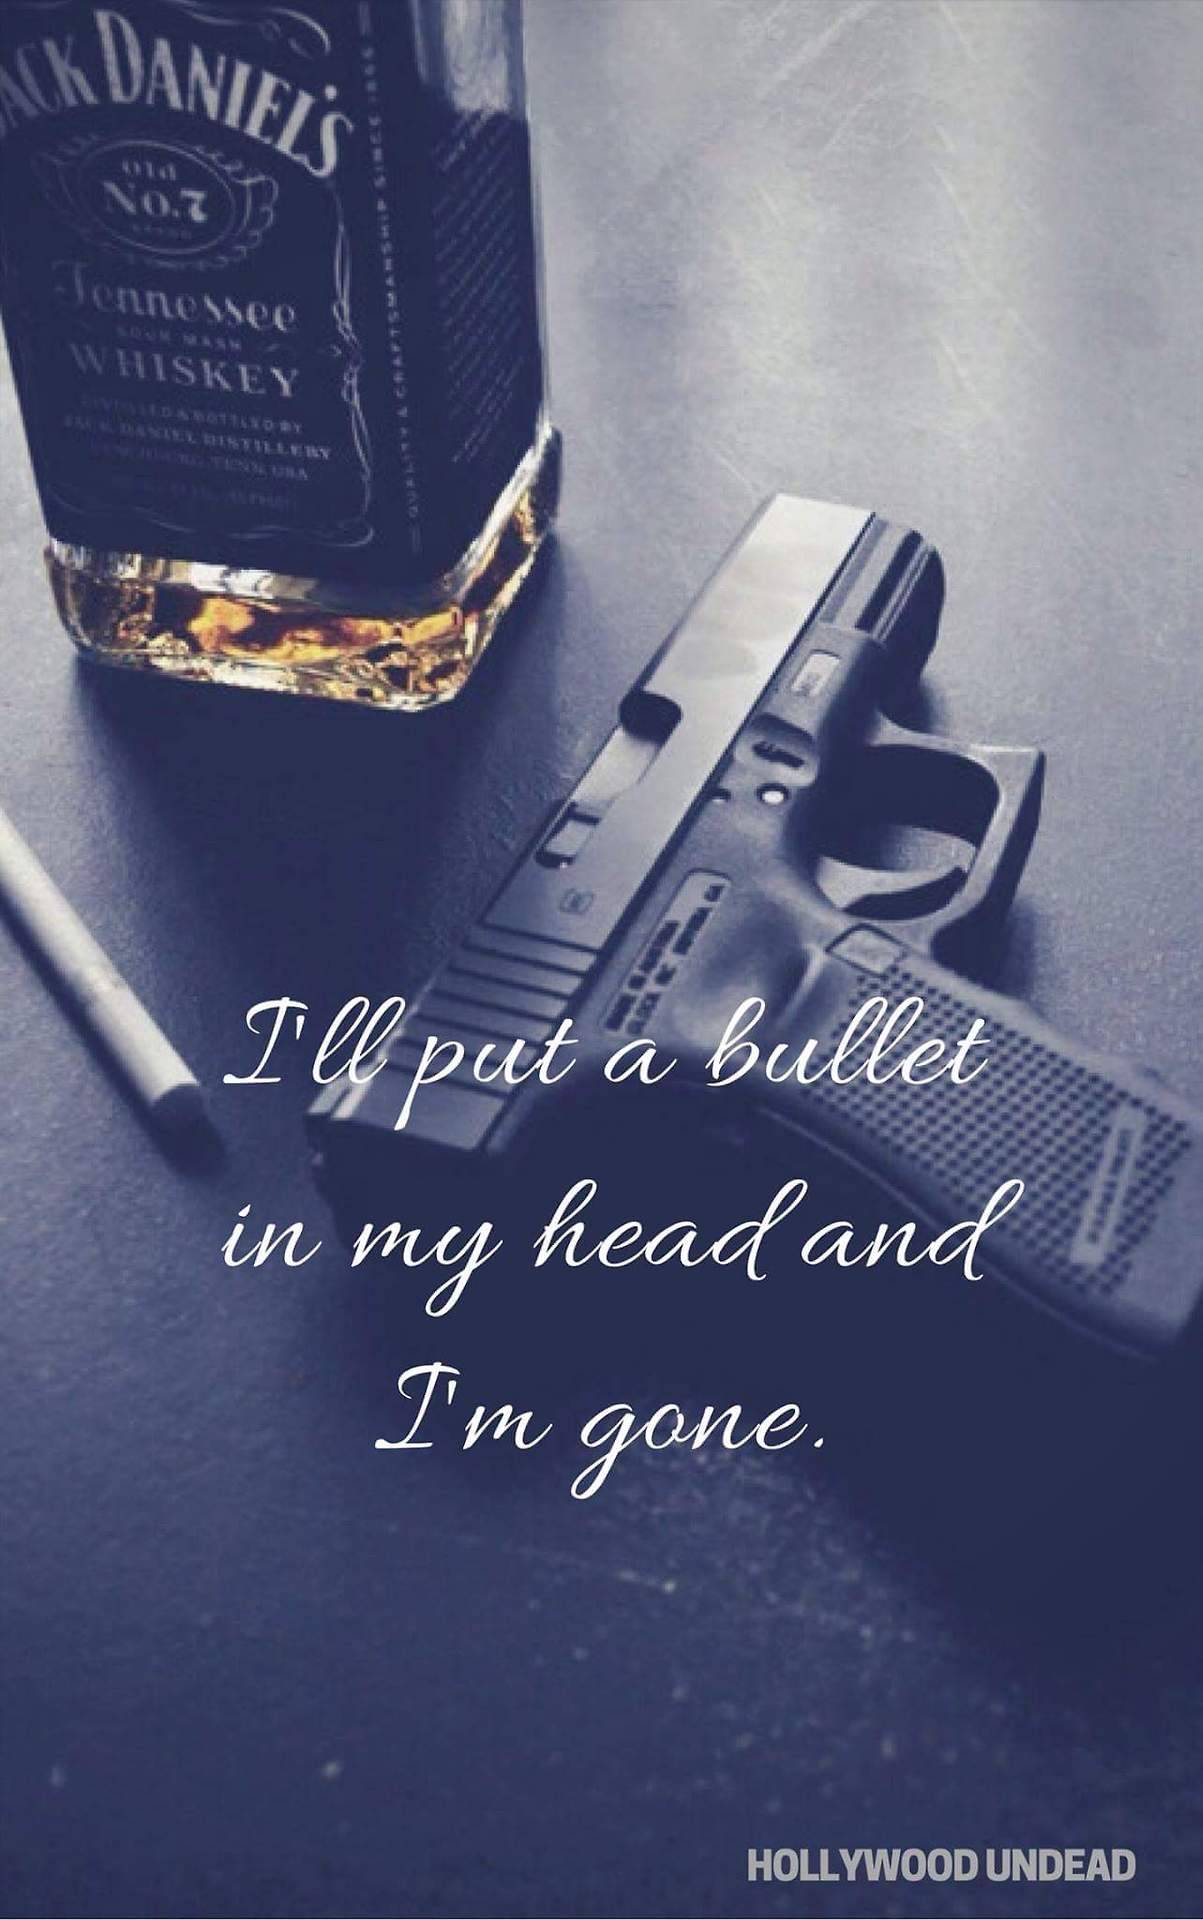 Hollywood Undead - “bullet” - Jack Daniels With Pistol , HD Wallpaper & Backgrounds